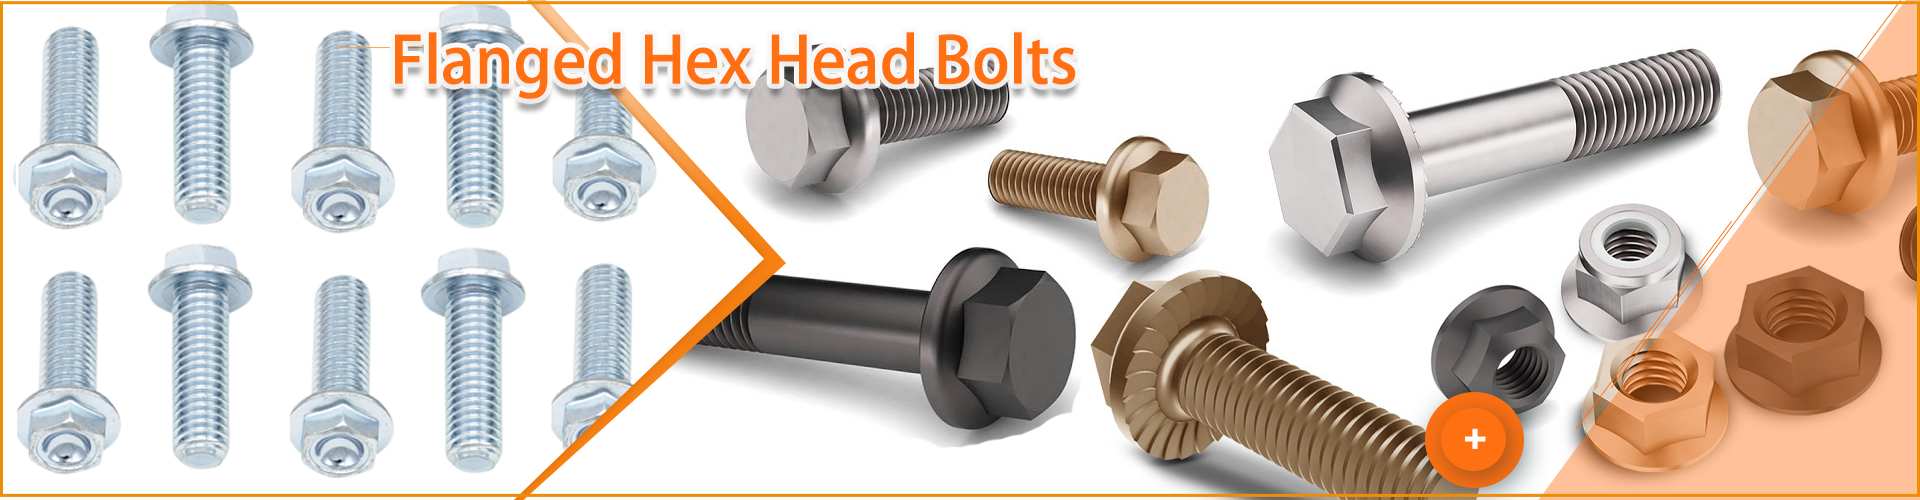 Flanged Hex Head Bolts